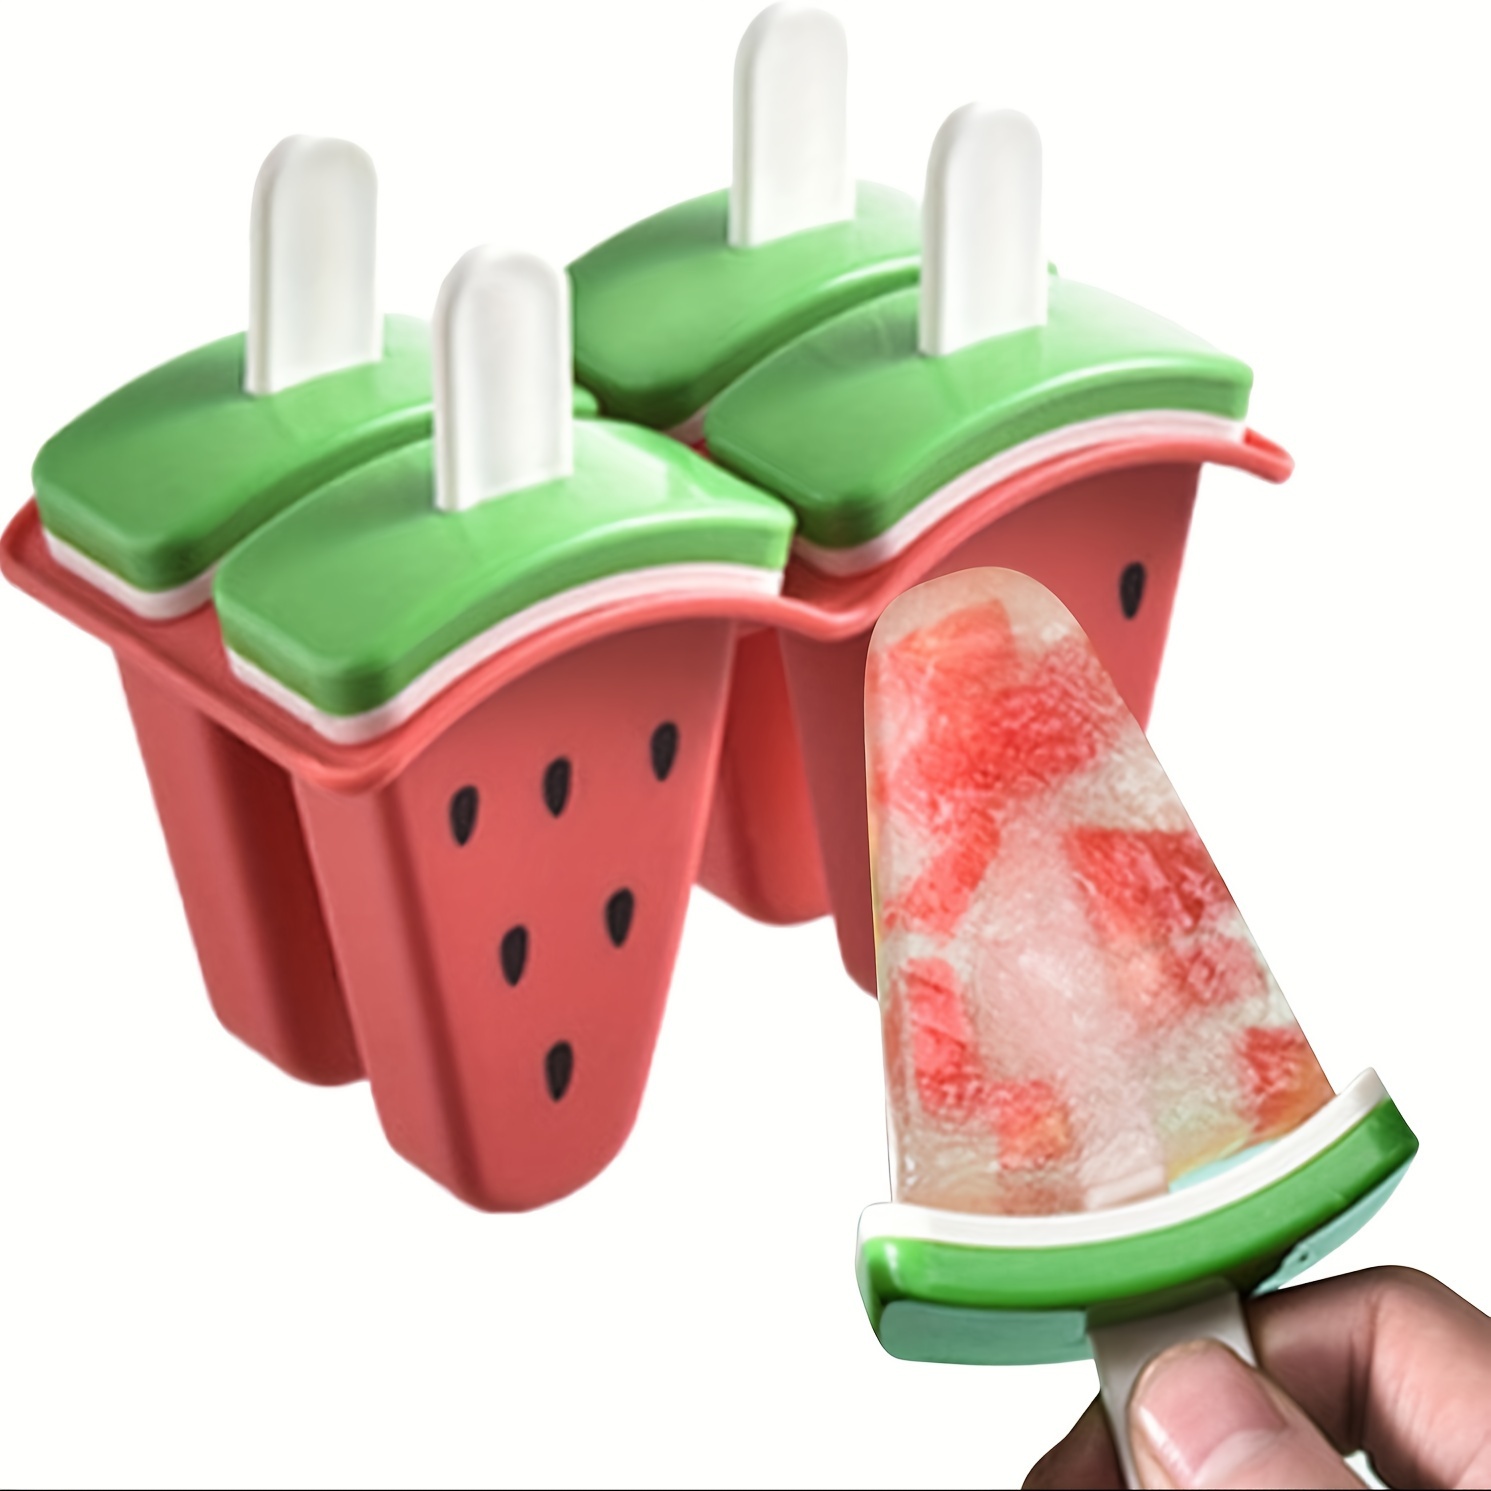 

1pc Watermelon Shaped Popsicle Mold, 4-cavity Reusable Plastic Ice Cream Mold Set With Sticks, Creative Kitchen Tool For Homemade Treats